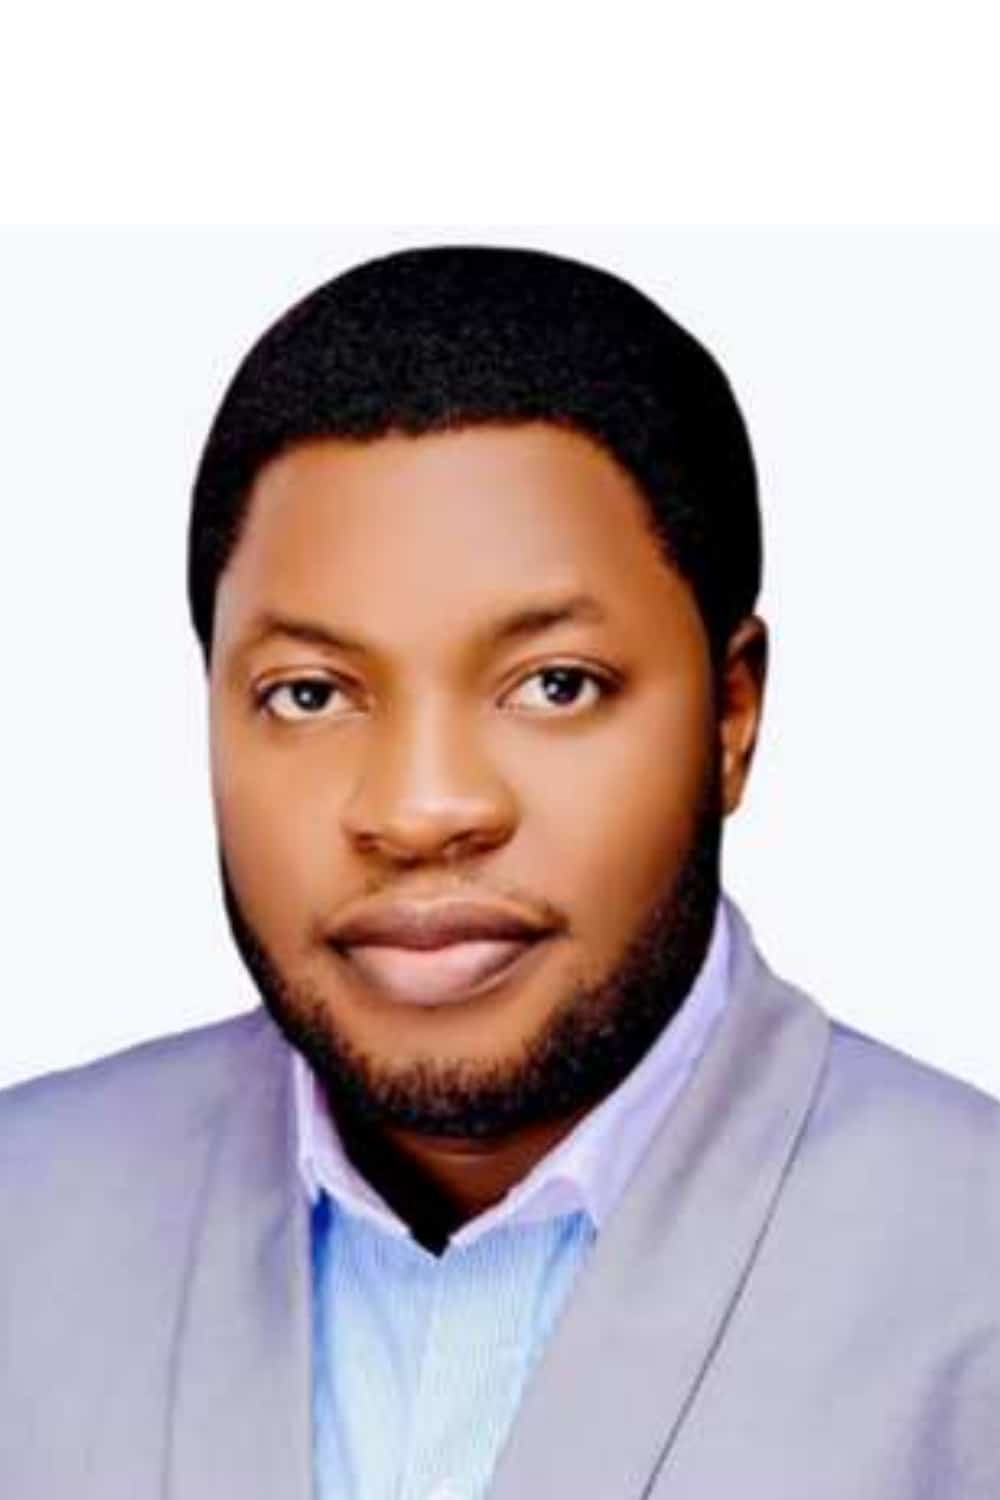 Nigerian student Noel Ifeanyi Alumona short-listed for $100,000 global student prize